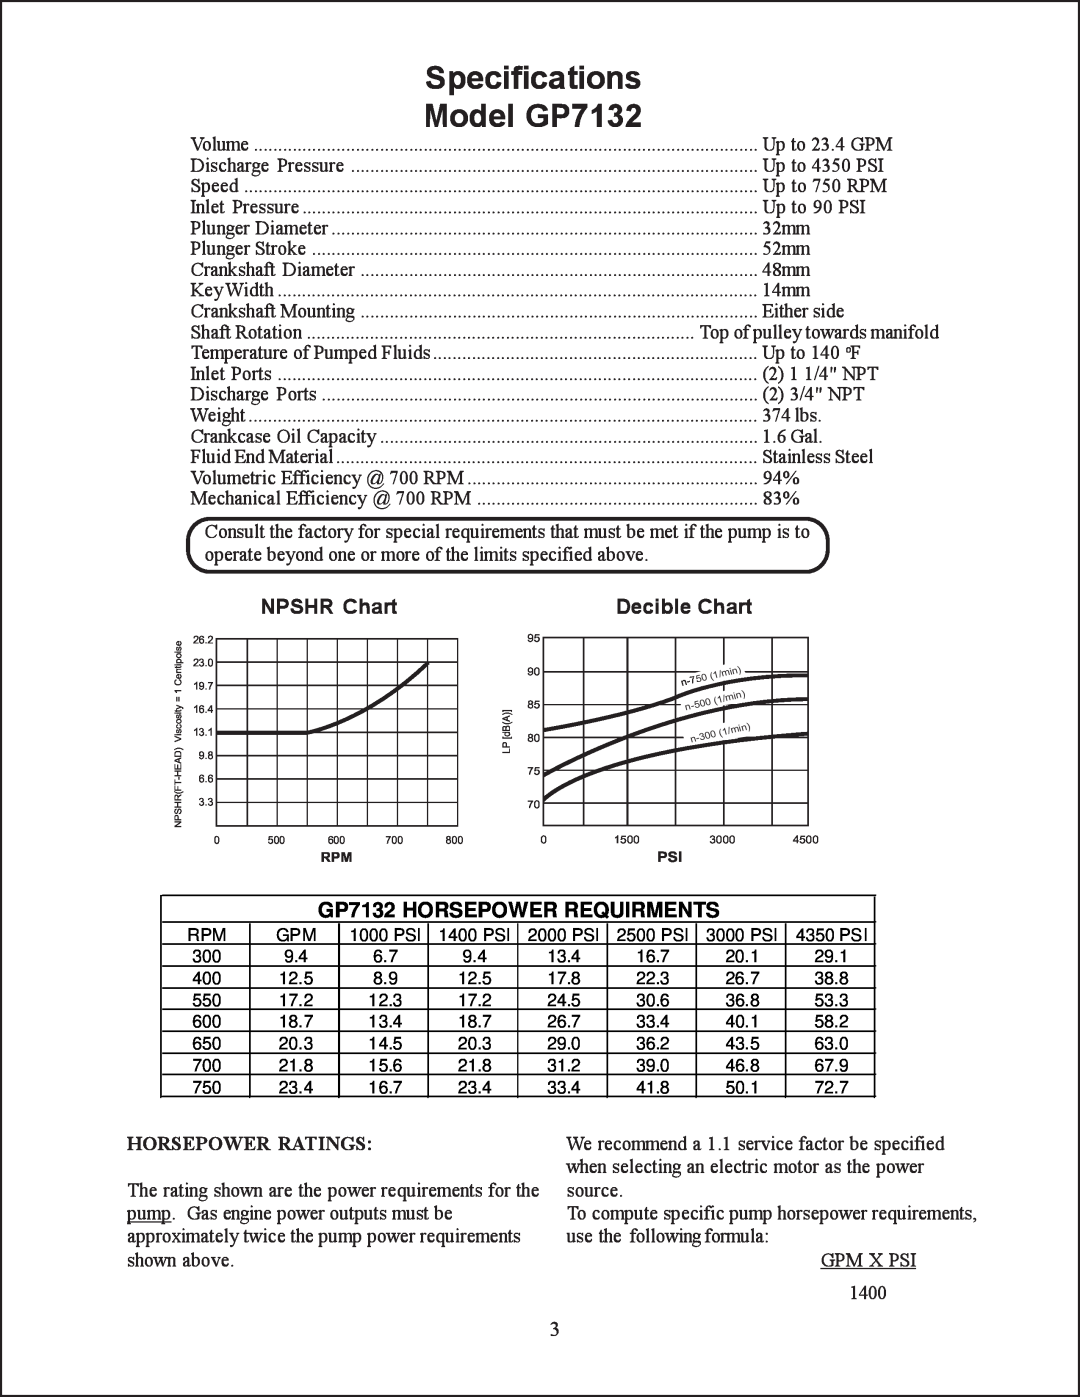 Giant GP7136 service manual Specifications, Model GP7132, NPSHR Chart, Decible Chart, GP7132 HORSEPOWER REQUIRMENTS 